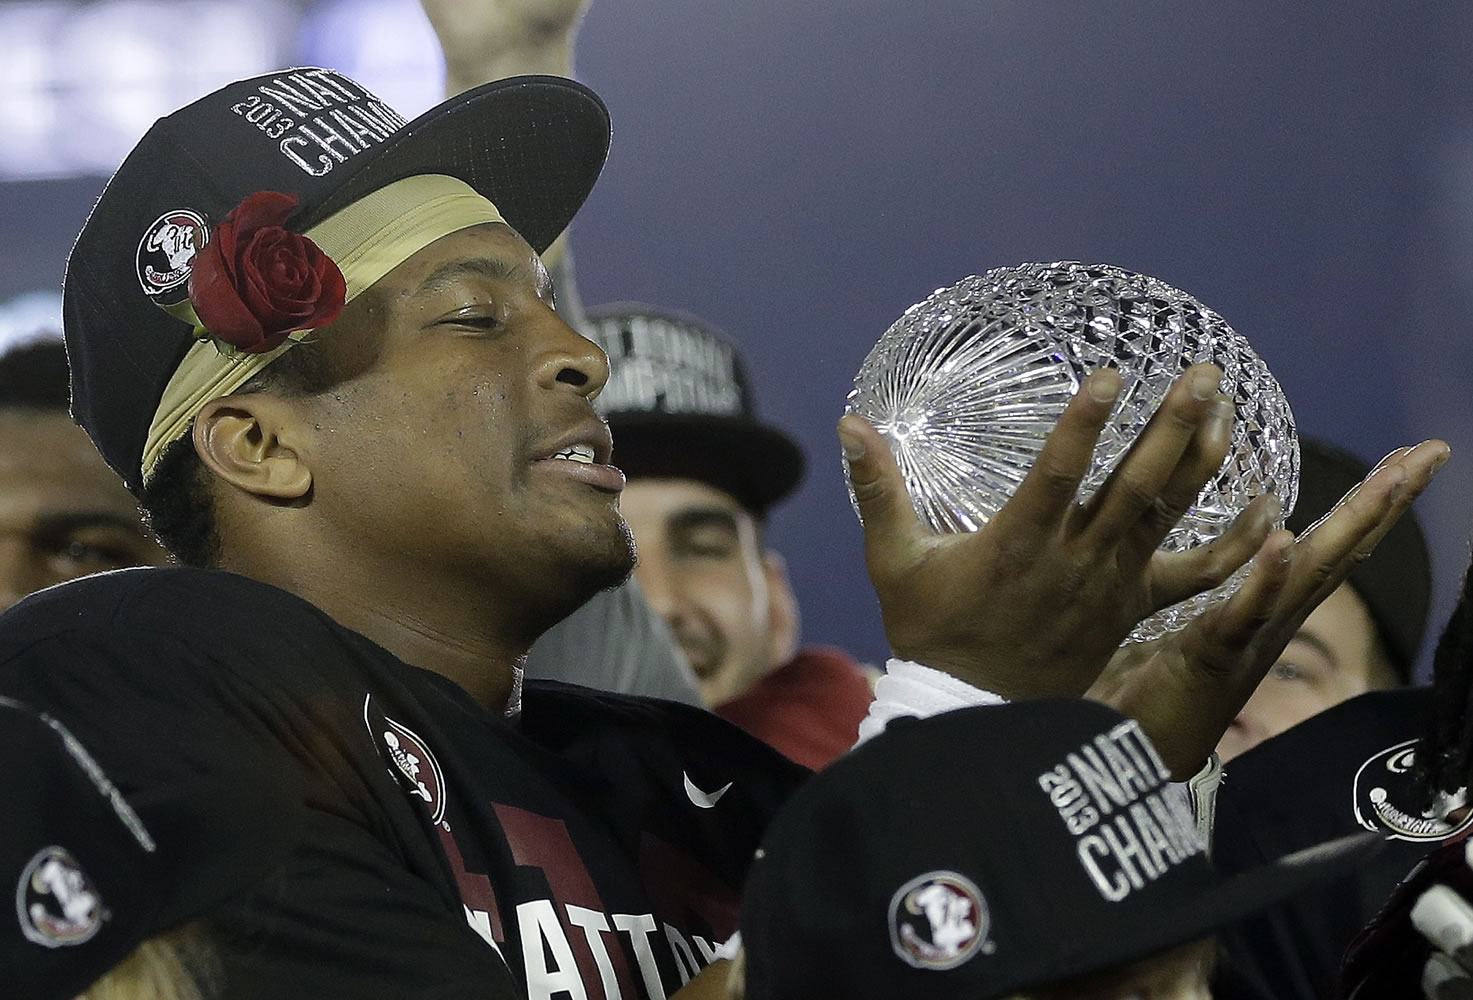 Florida State's Jameis Winston with The Coaches' Trophy after beating Auburn 34-31 for the NCAA BCS National Championship. (AP Photo/David J.